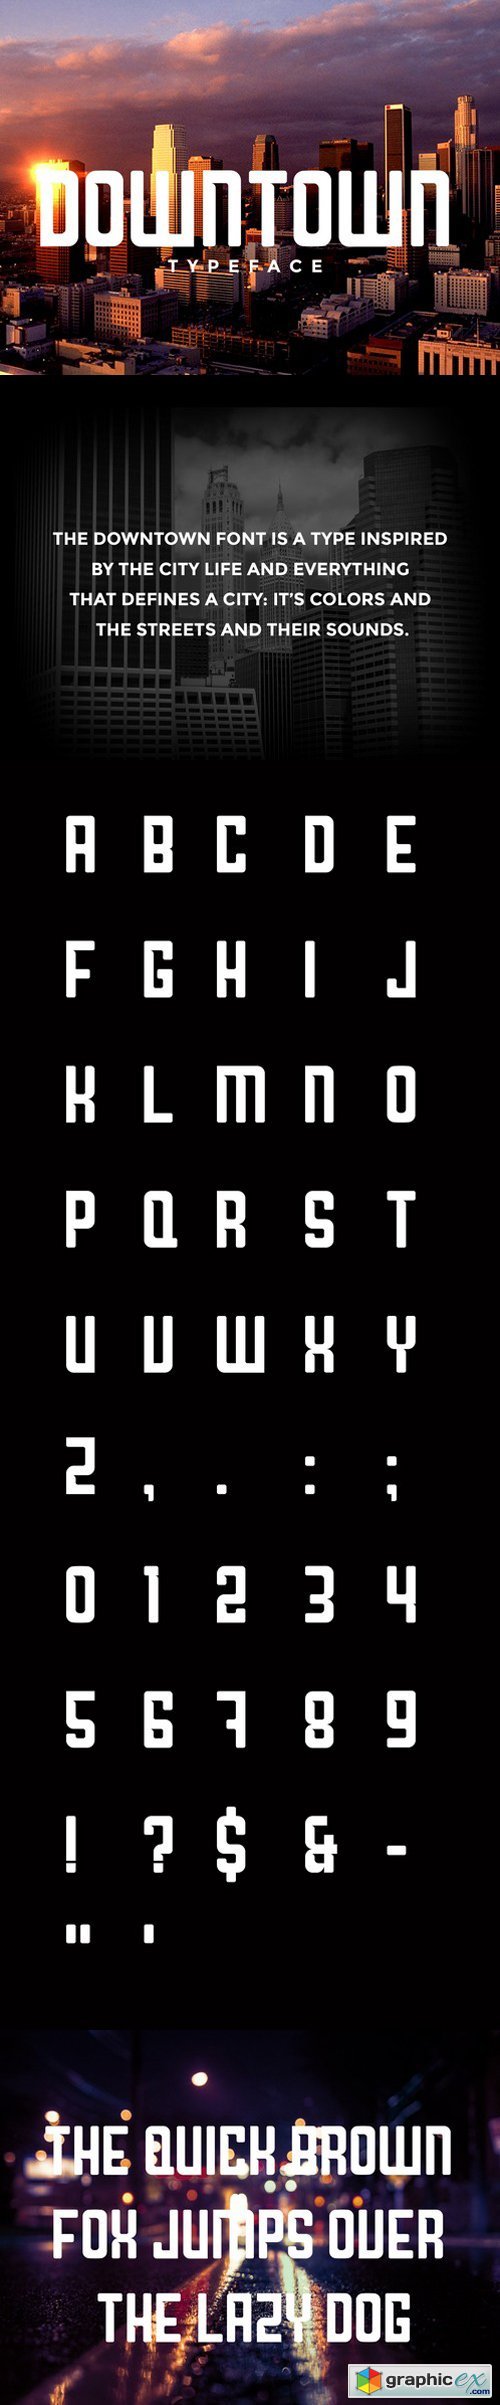 Downtown Typeface